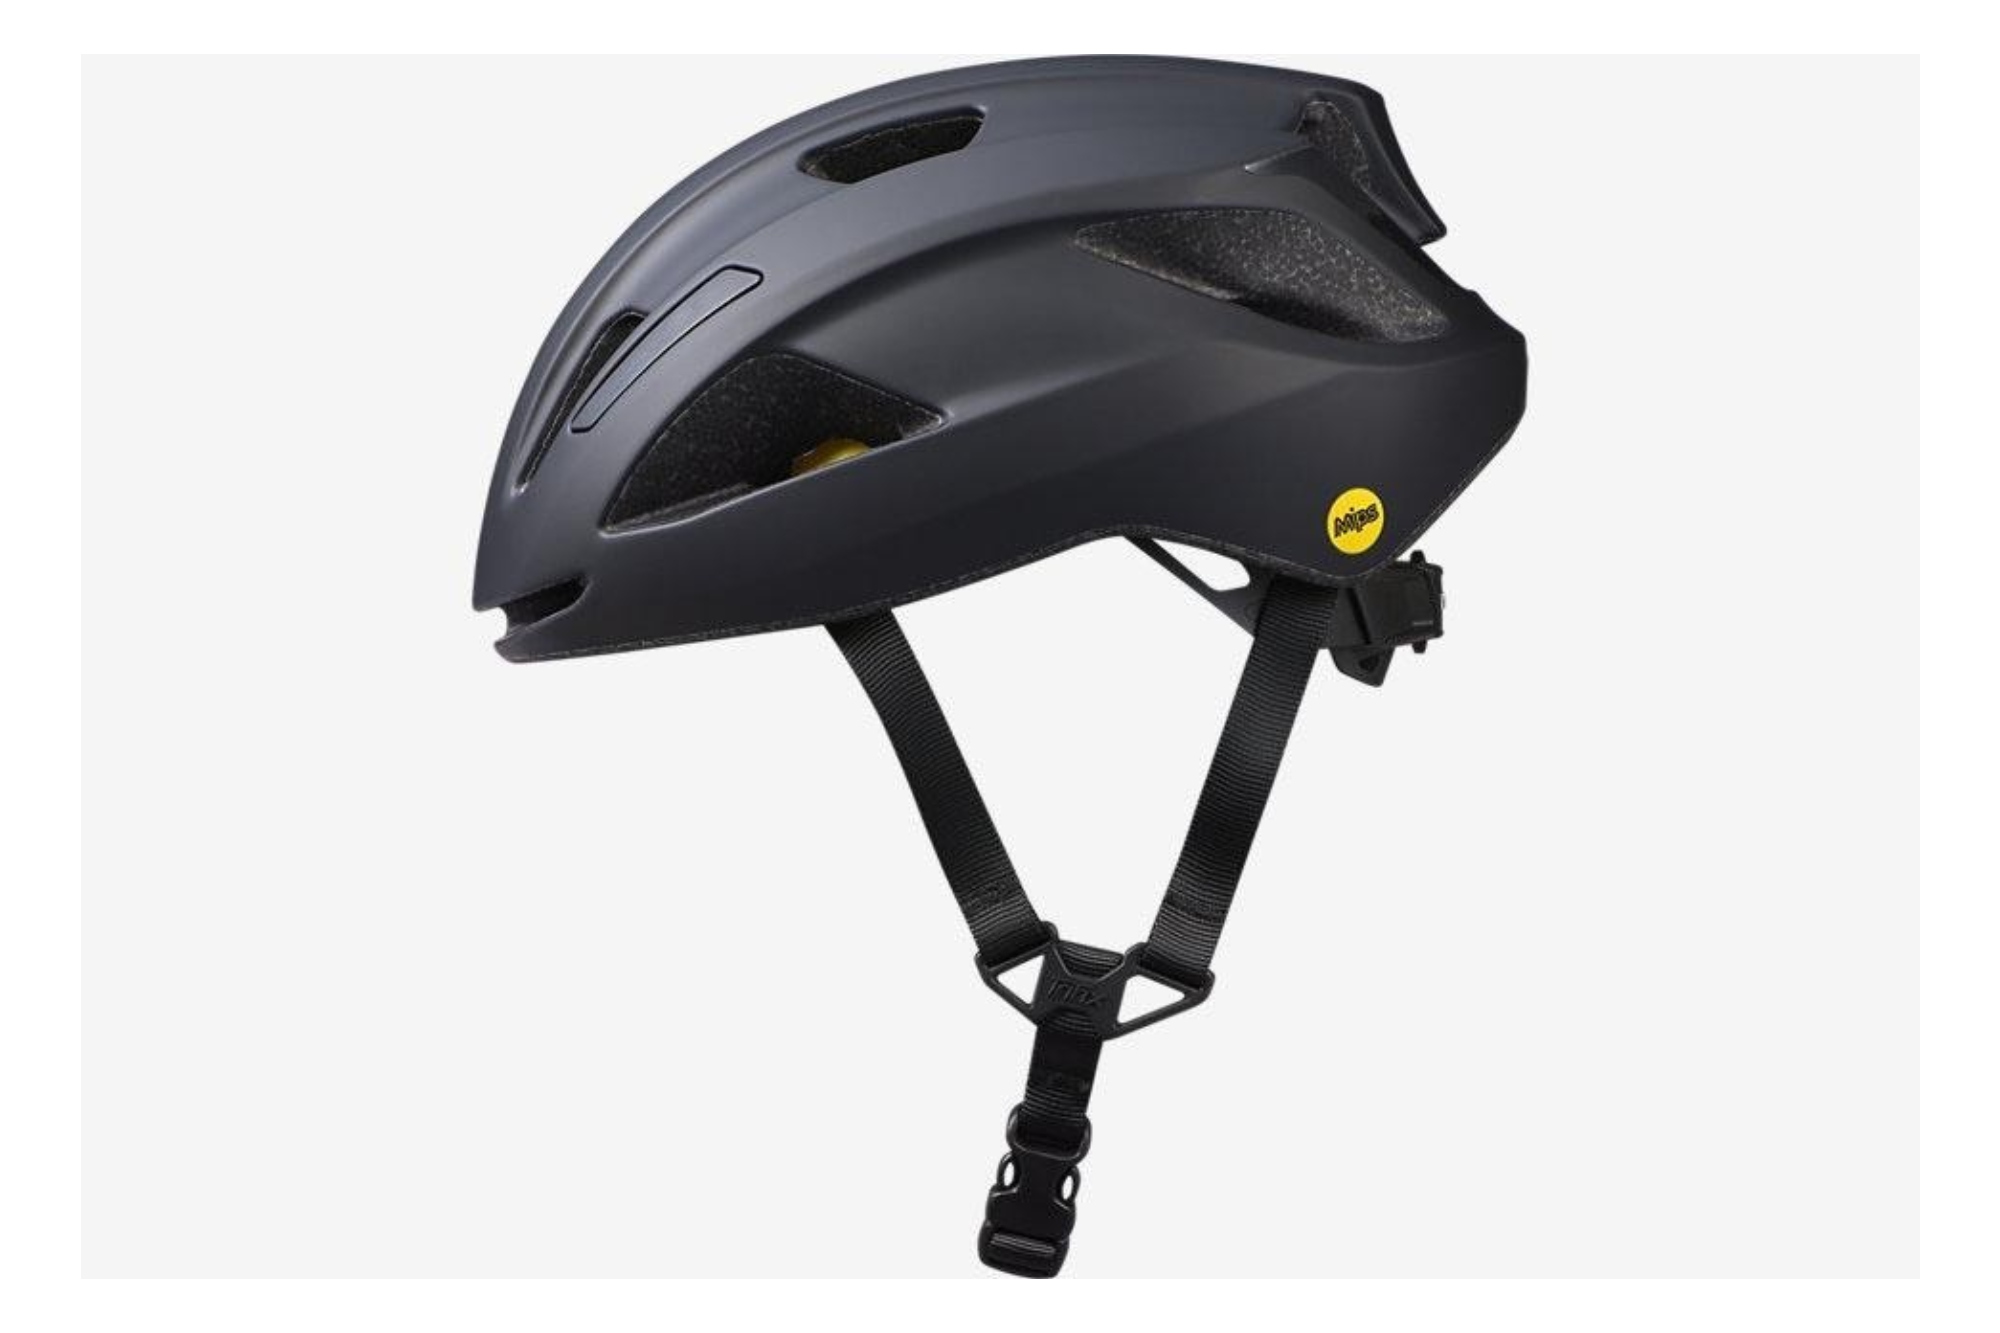 Specialized Align helmet in black with straps hanging down on a white background